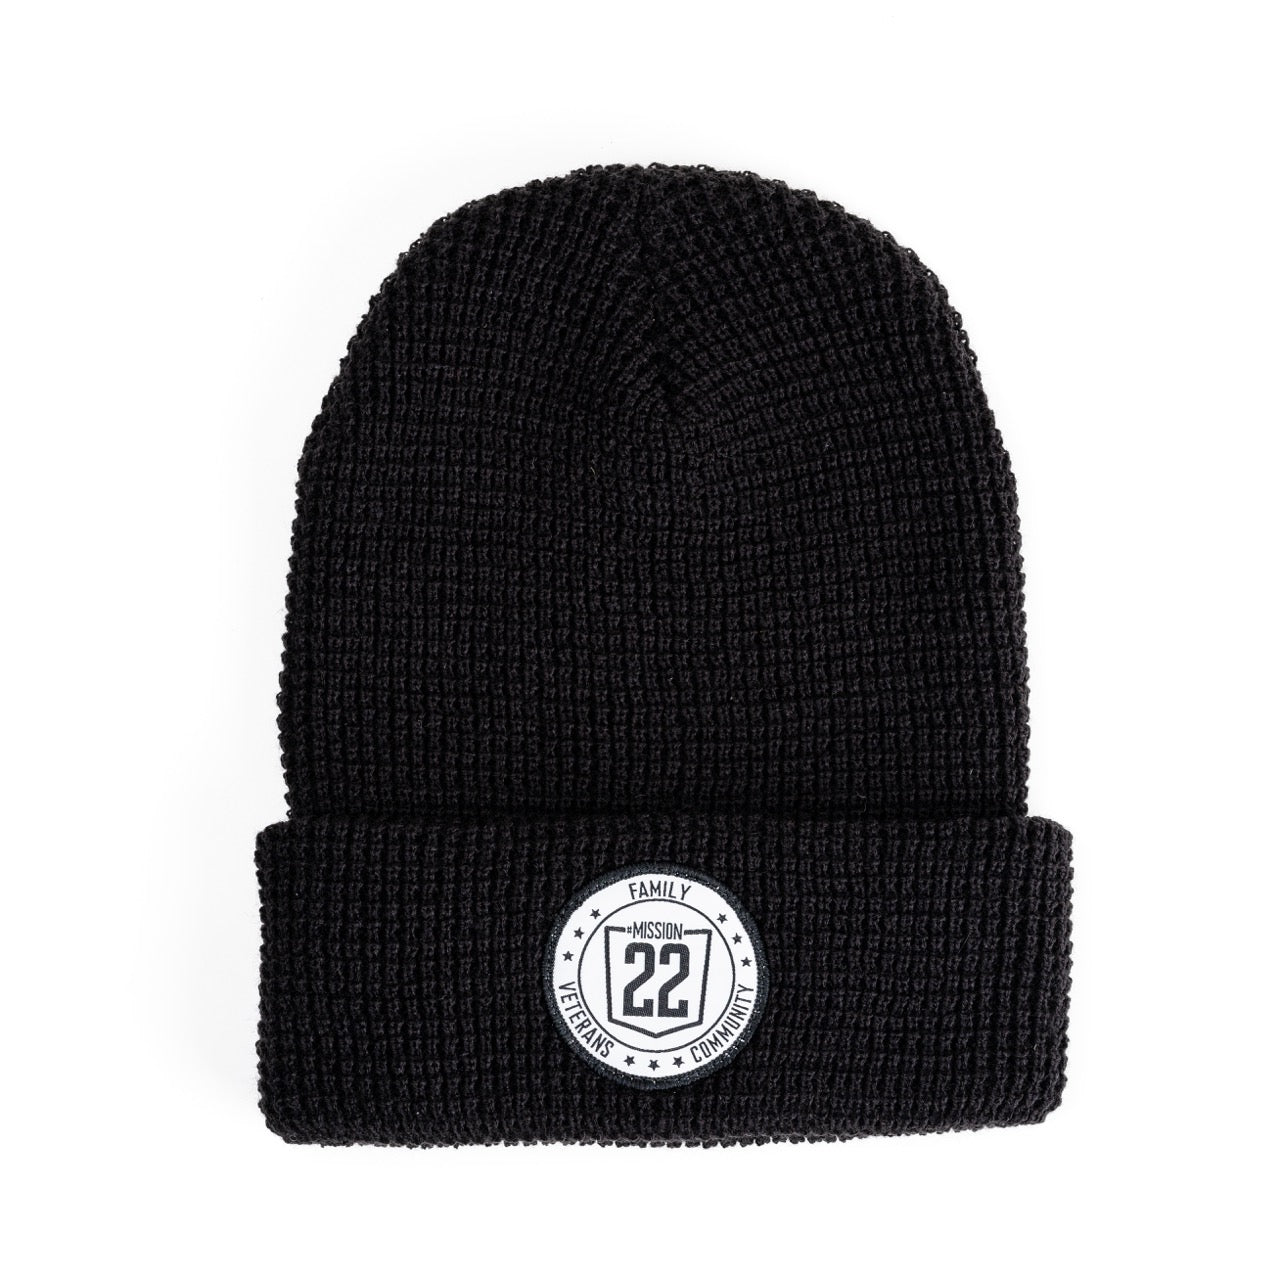 Product Image of Knit Cap #2